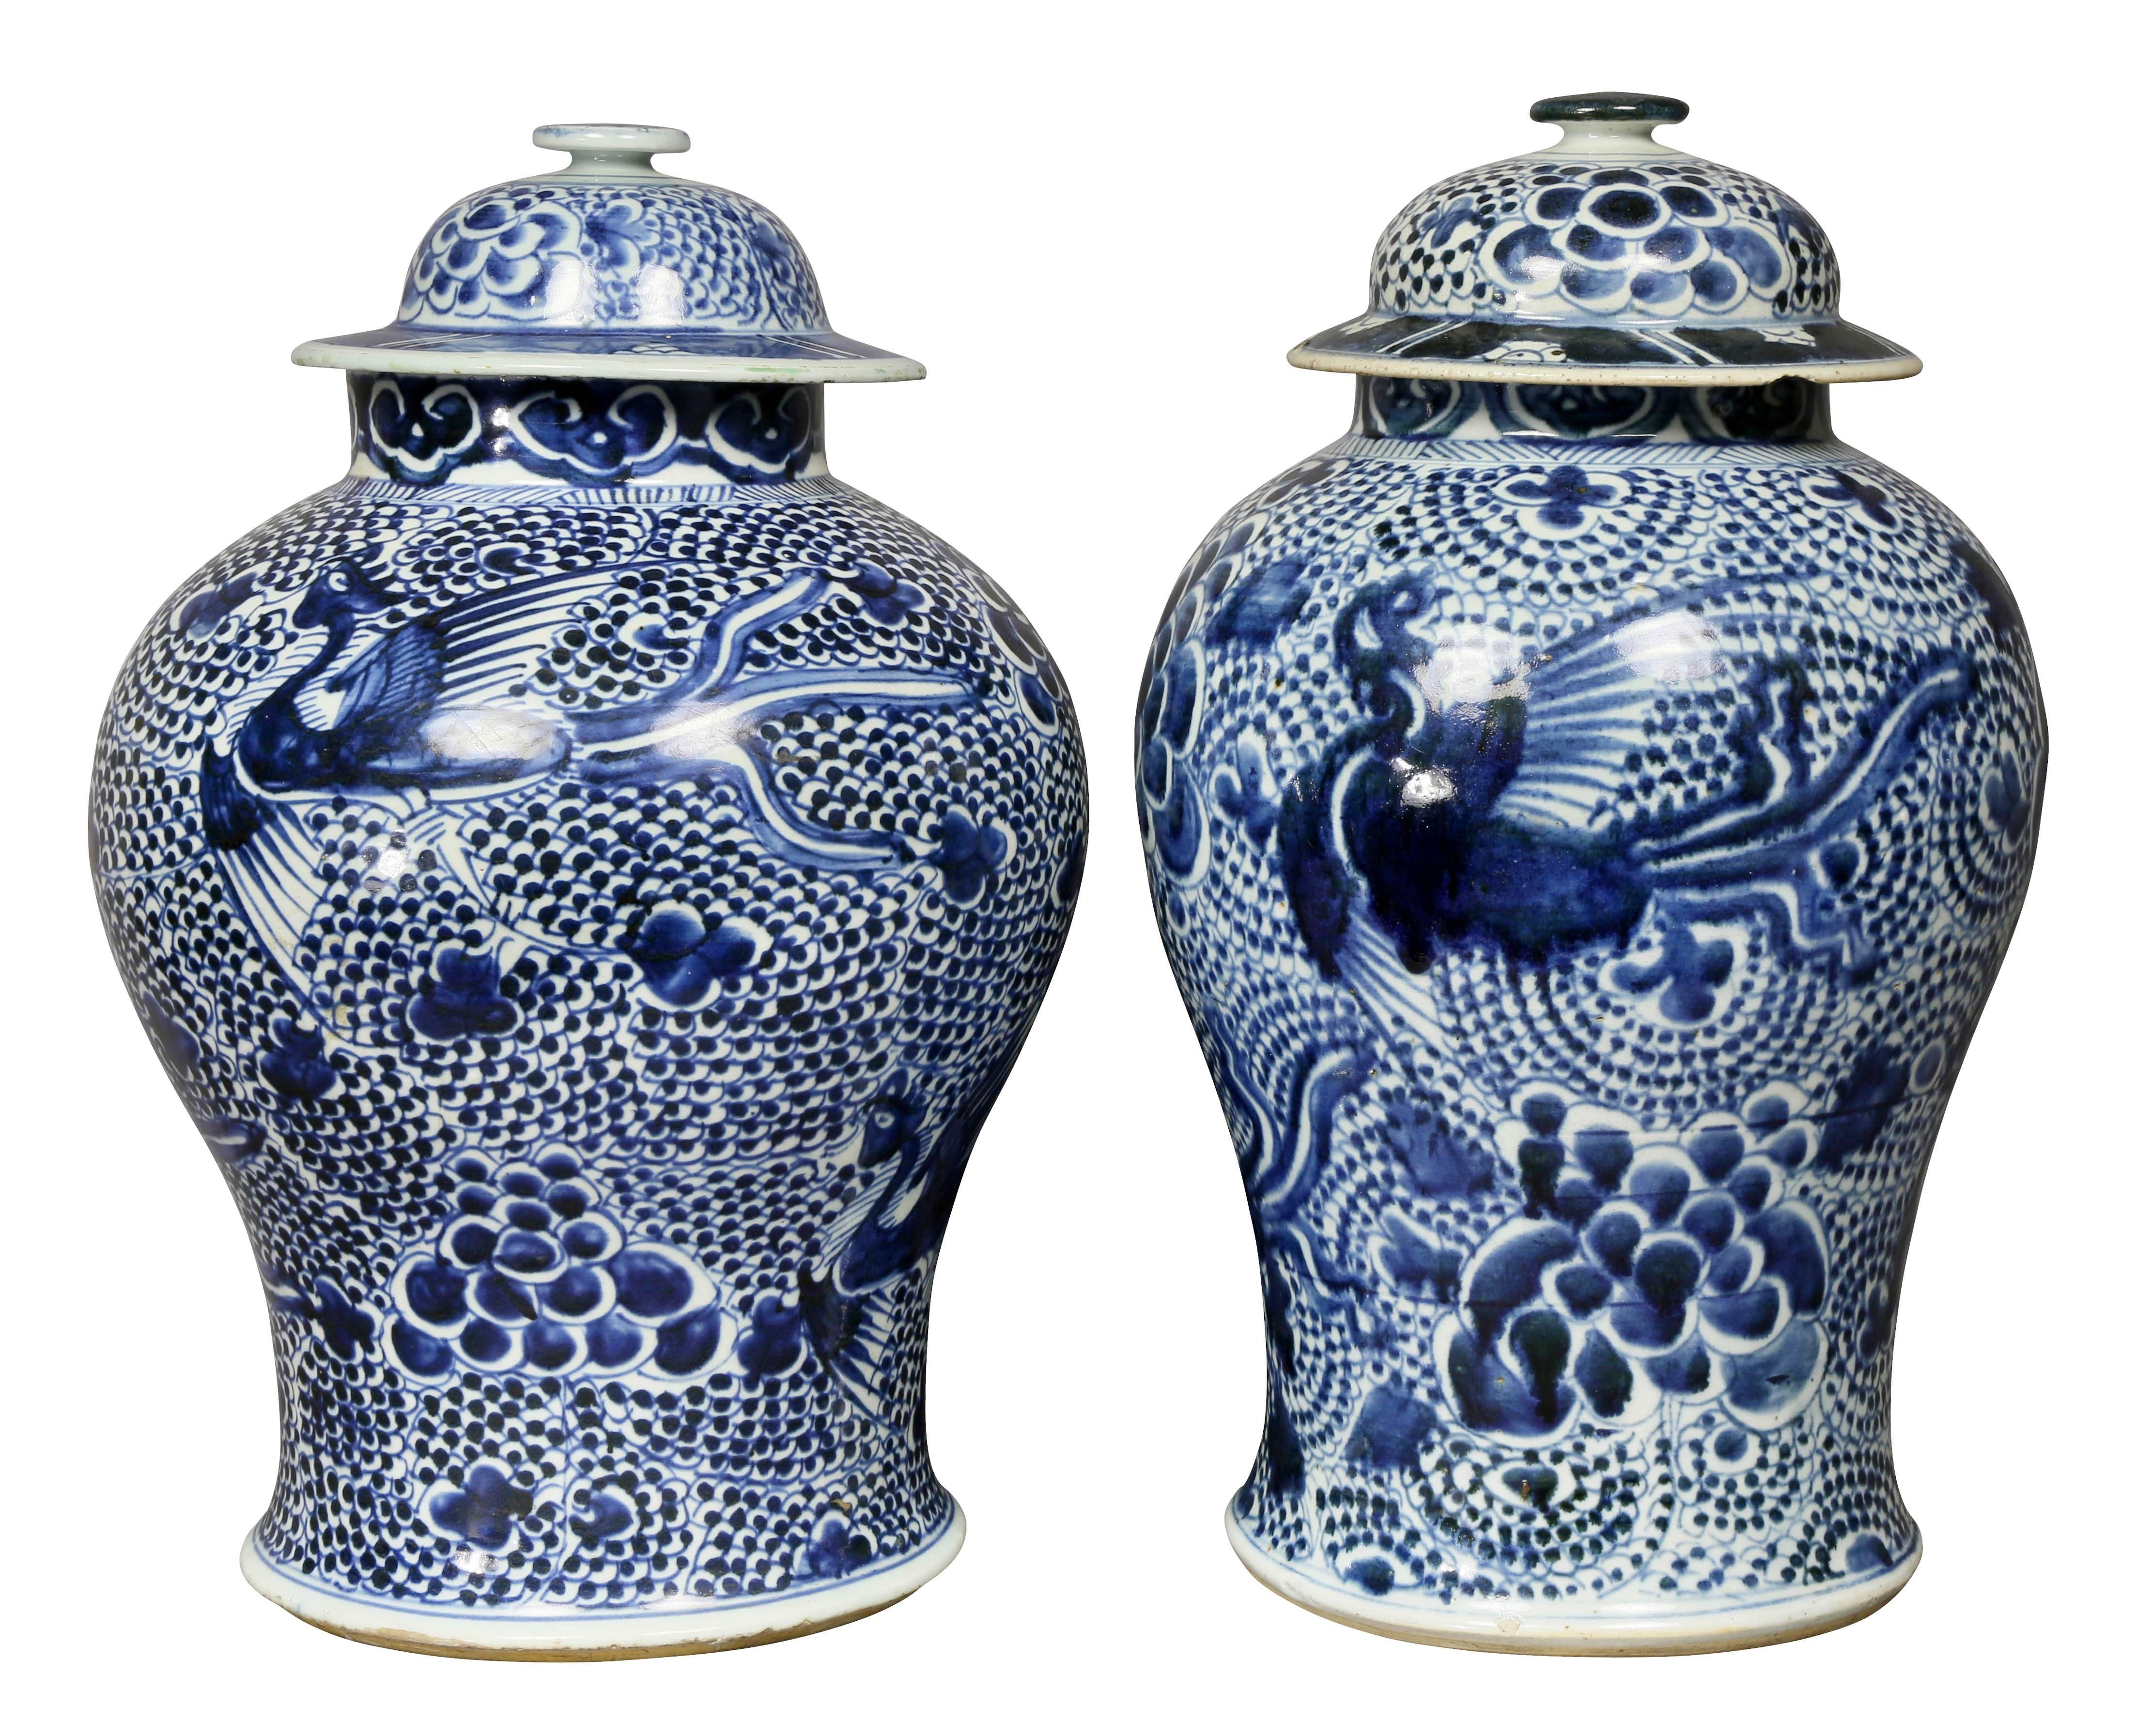 Matched Pair of Chinese Blue and White Covered Jars 3